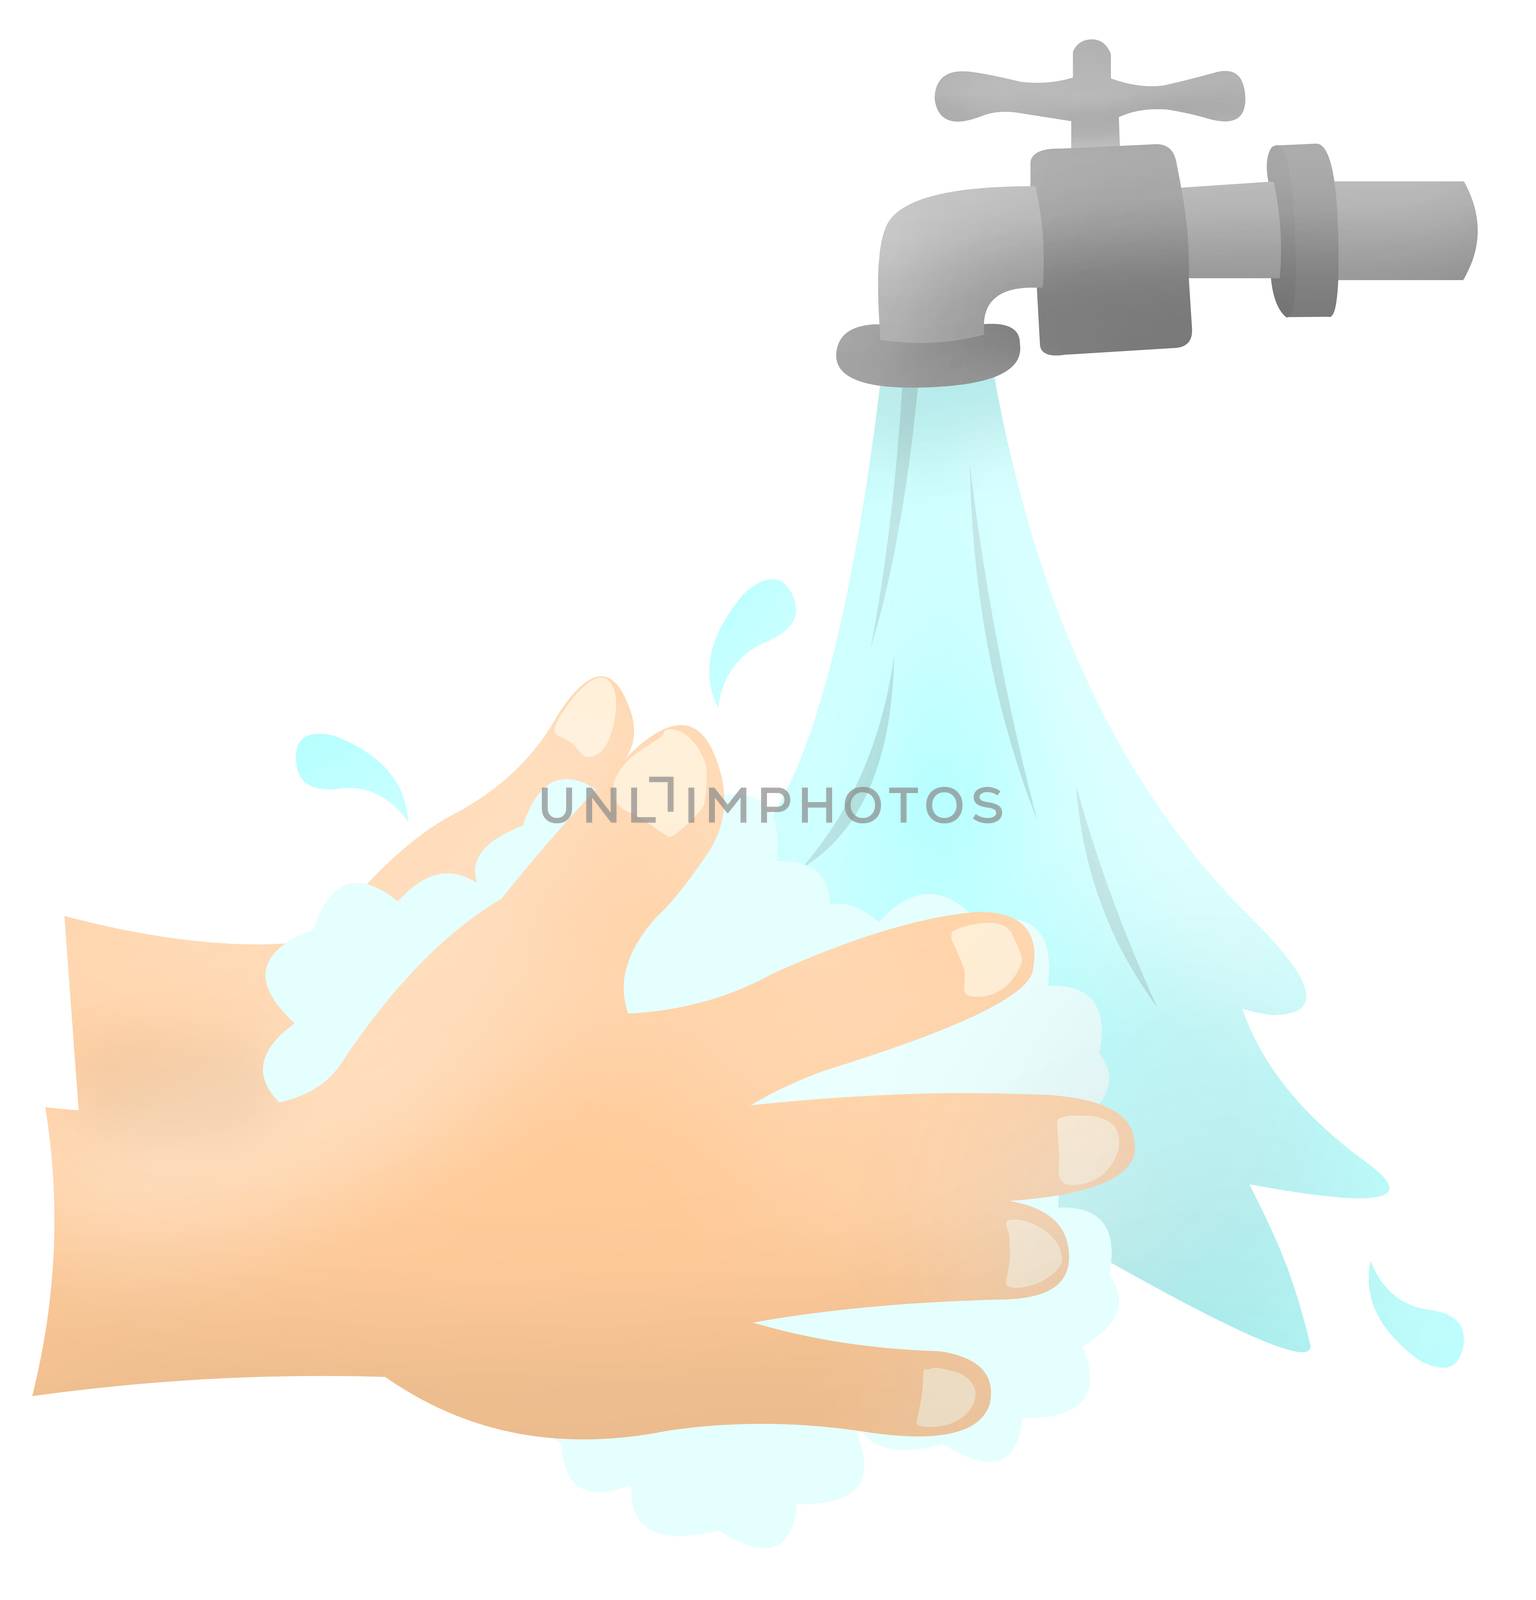 washing hands cartoon high quality. Wash hand concept 2d illustration. A man or woman washing hands under faucet with soap and water. corona virus protection healthcare in flat design. by Andreajk3